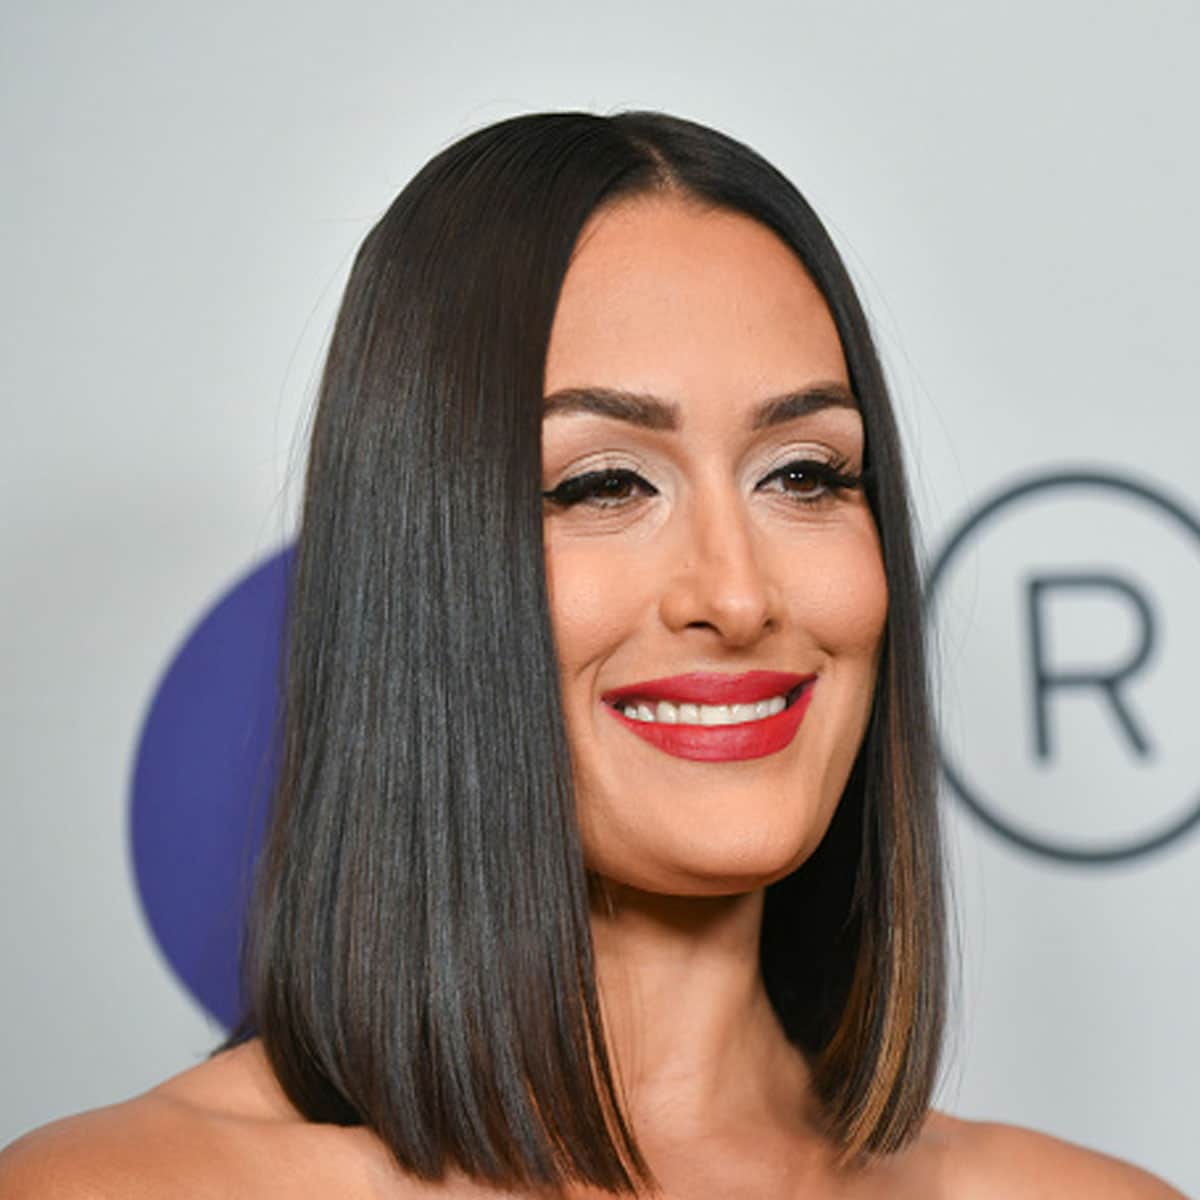 Nikki Bella attends the 47th annual Gracie Awards Gala